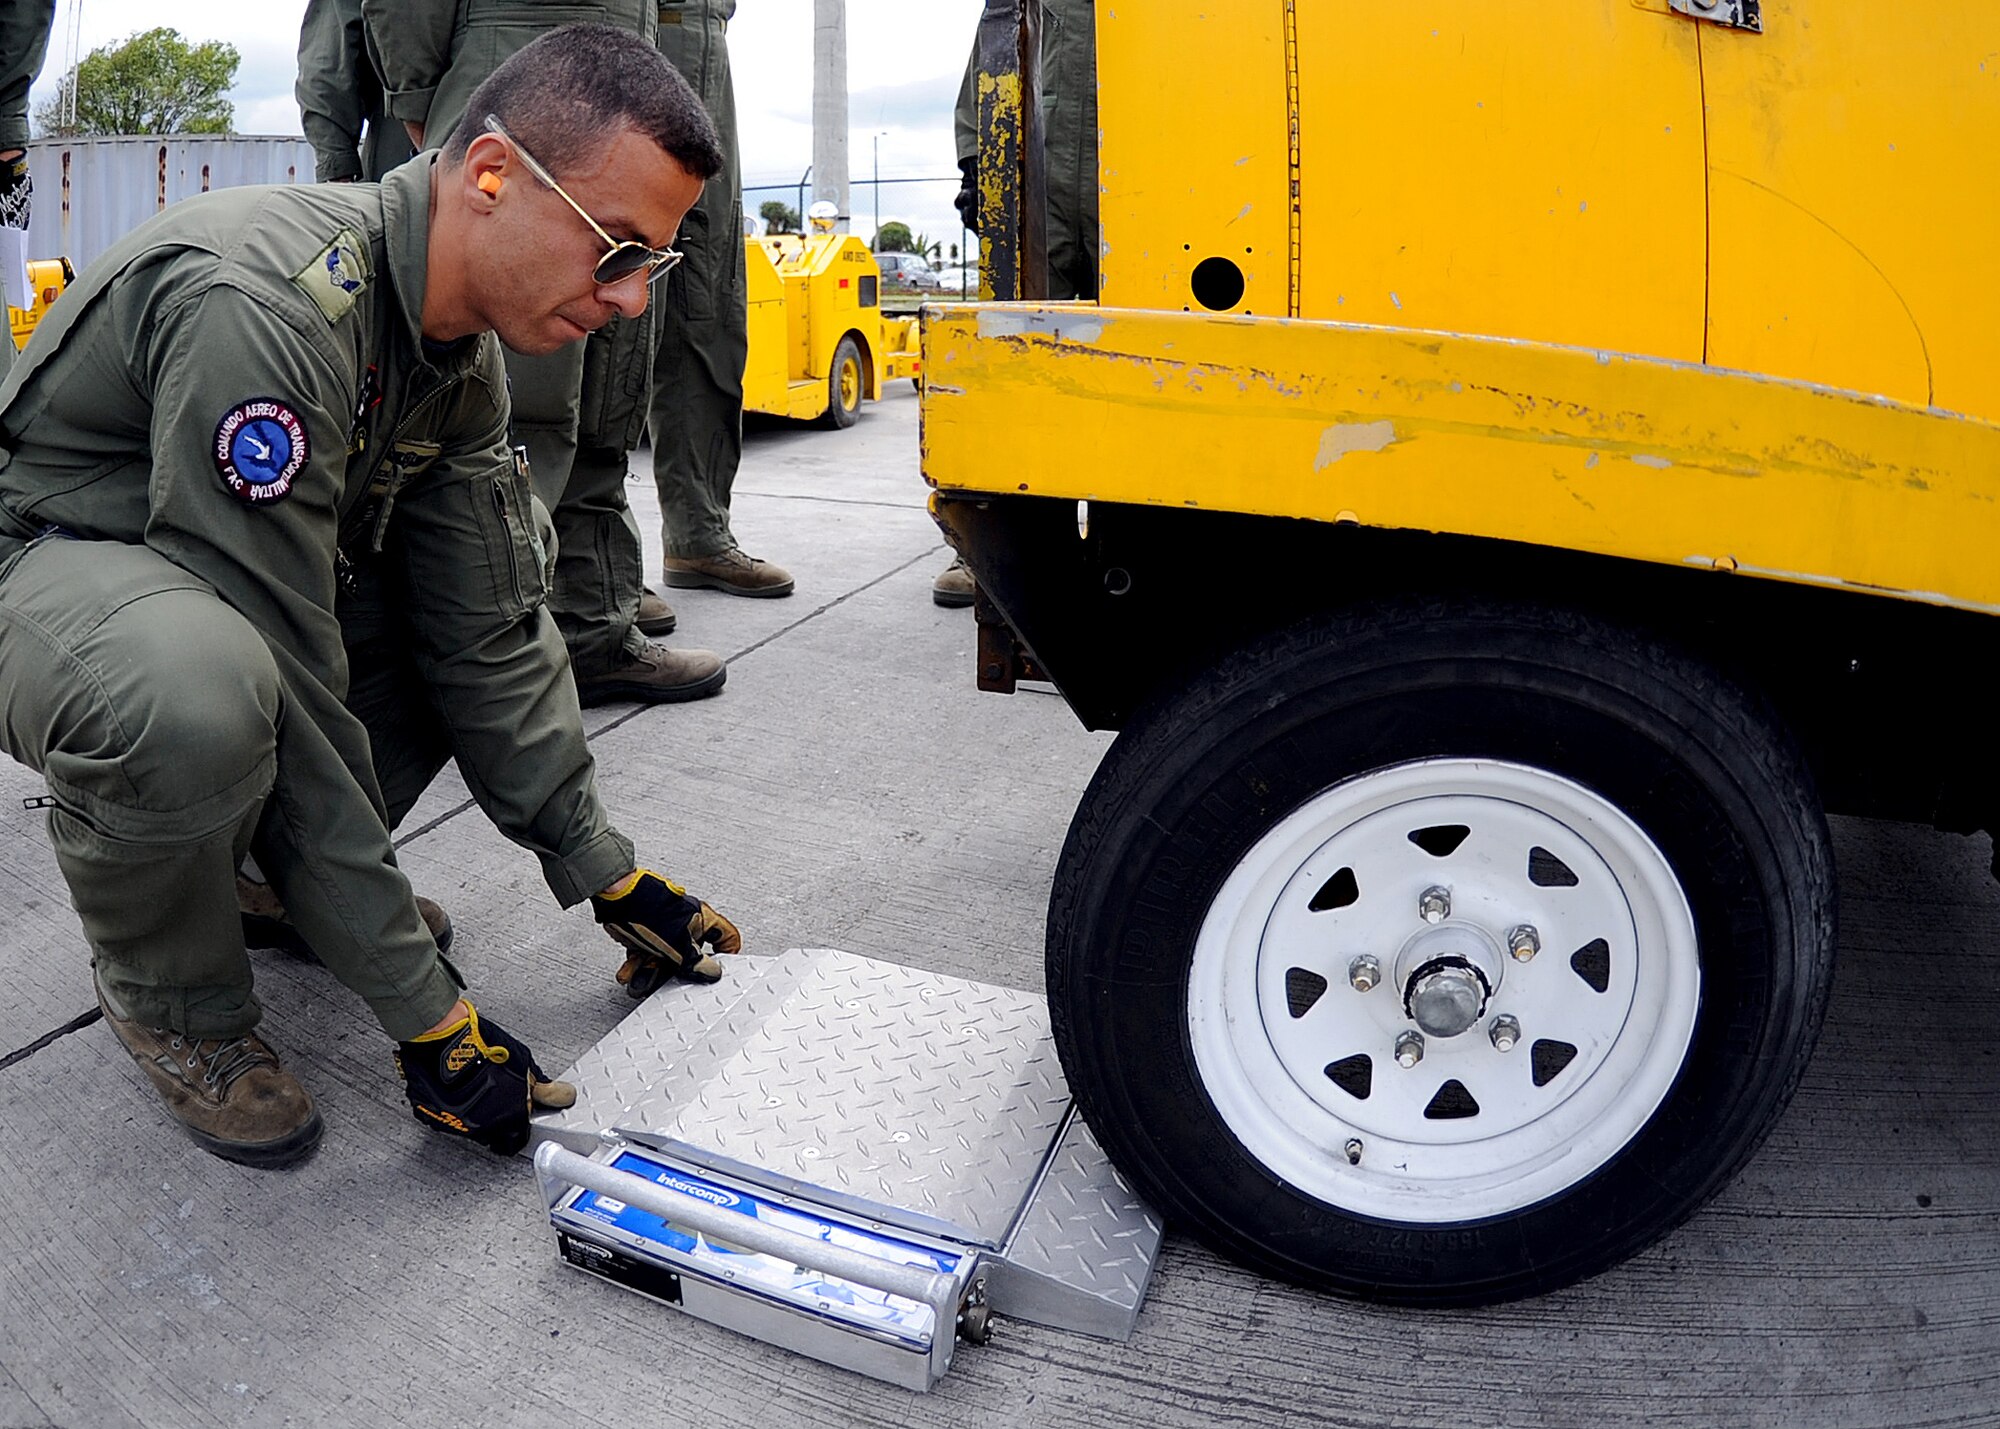 Técnico Primero Jorge Barragan, Colombian air force member, positions the portable scale before weighing the rolling stock during the pallet build-up seminar June 6 at Commando Aéreo de Transporte Militar, Bogota, Colombia.  (U.S. Air Force photo by Tech. Sgt. Lesley Waters)